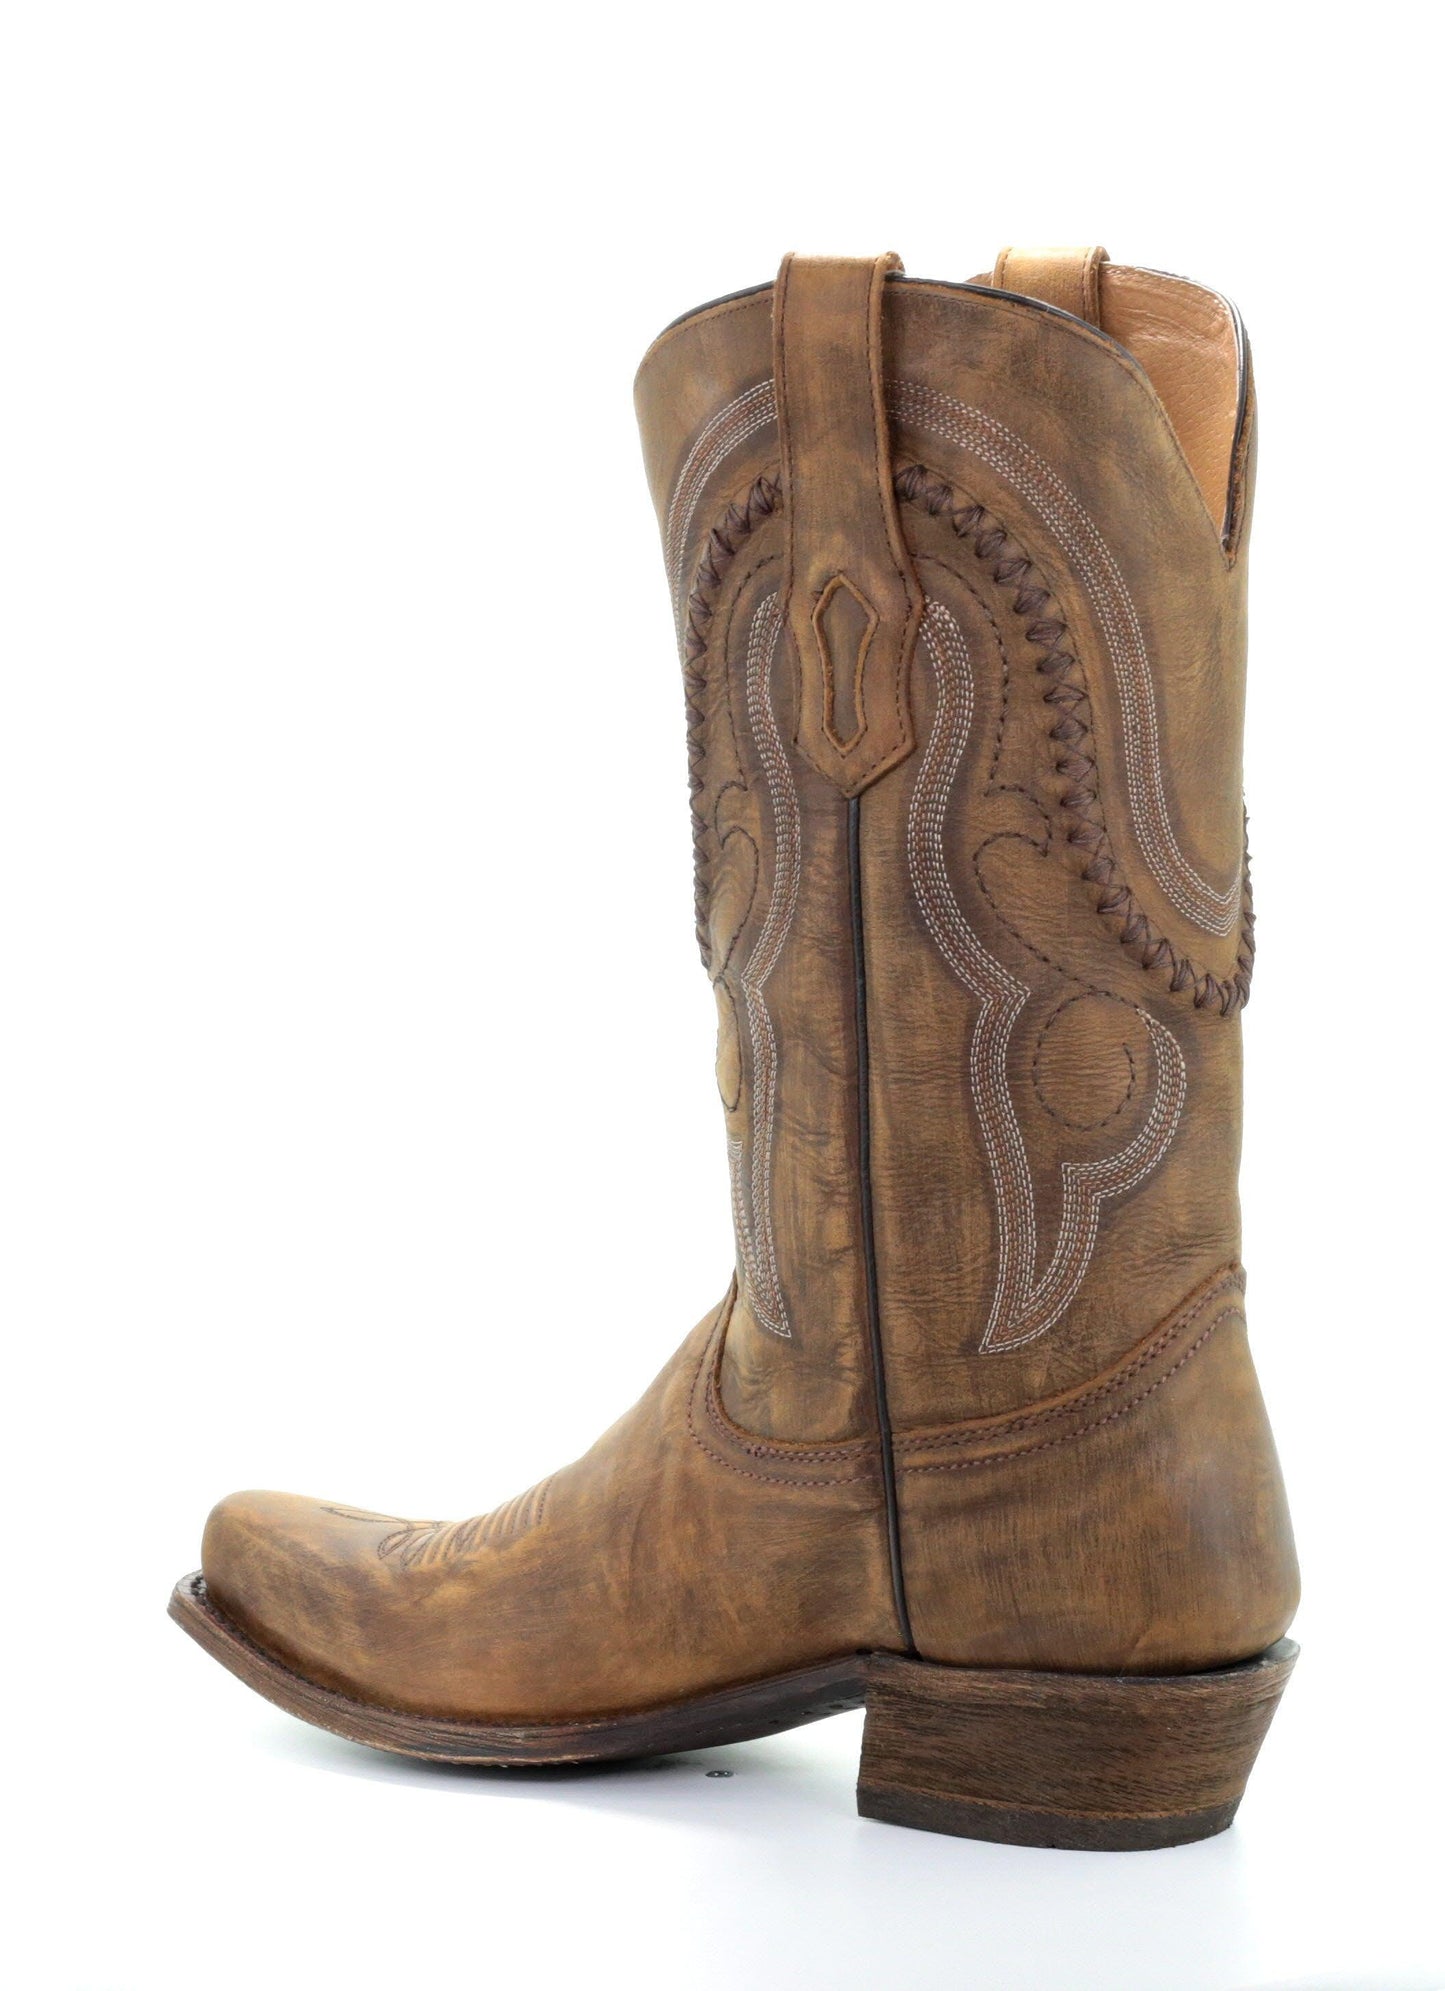 A3479 - Corral gold western cowboy leather boots for men-Kuet.us